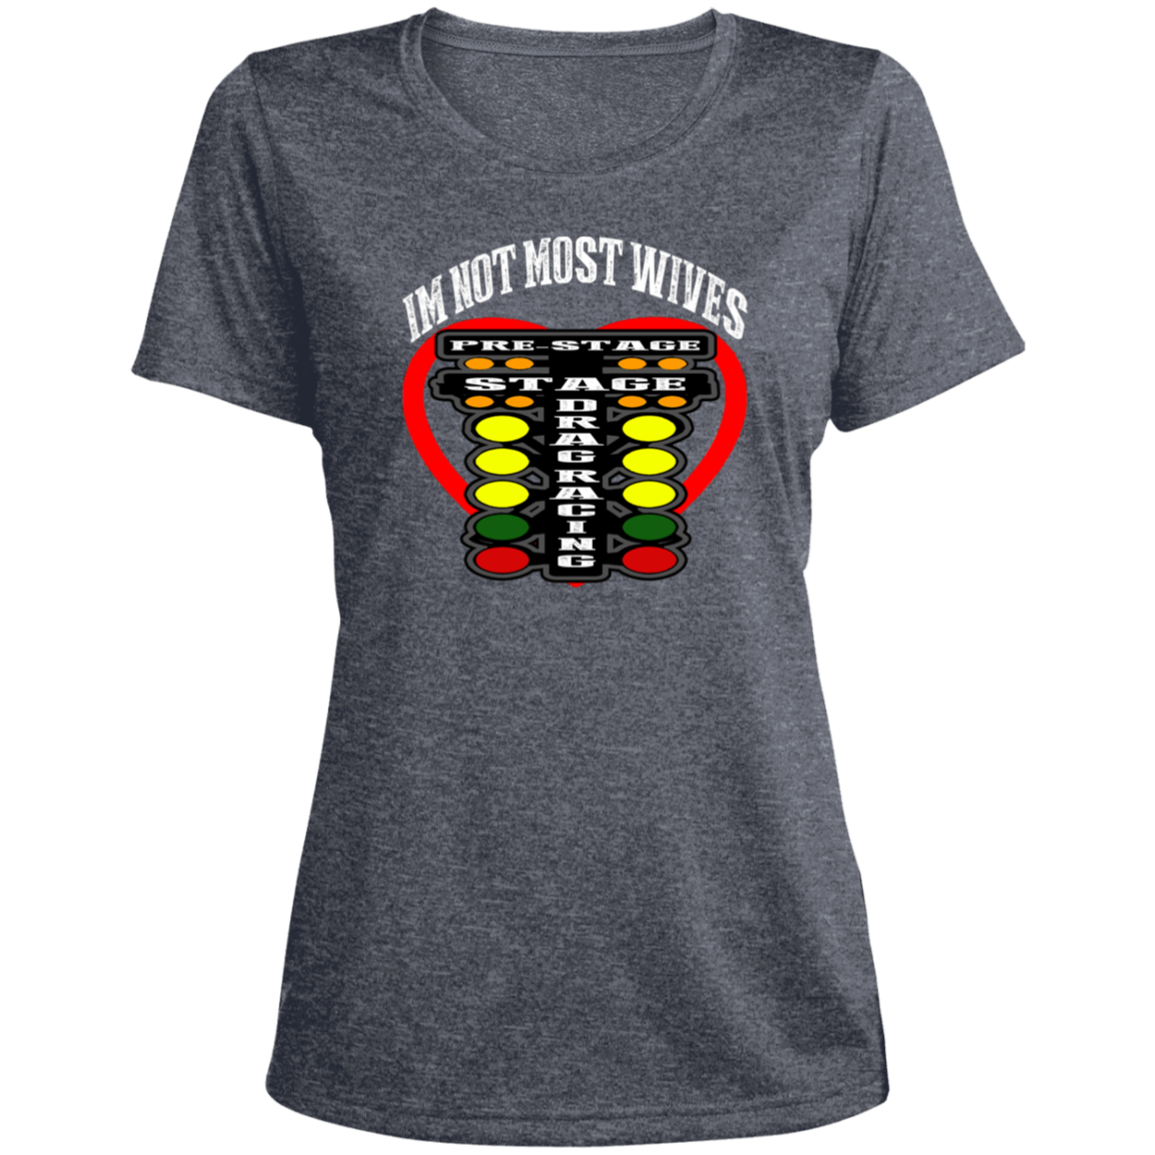 I'm Not Most Wives Drag Racing Ladies' Heather Scoop Neck Performance Tee